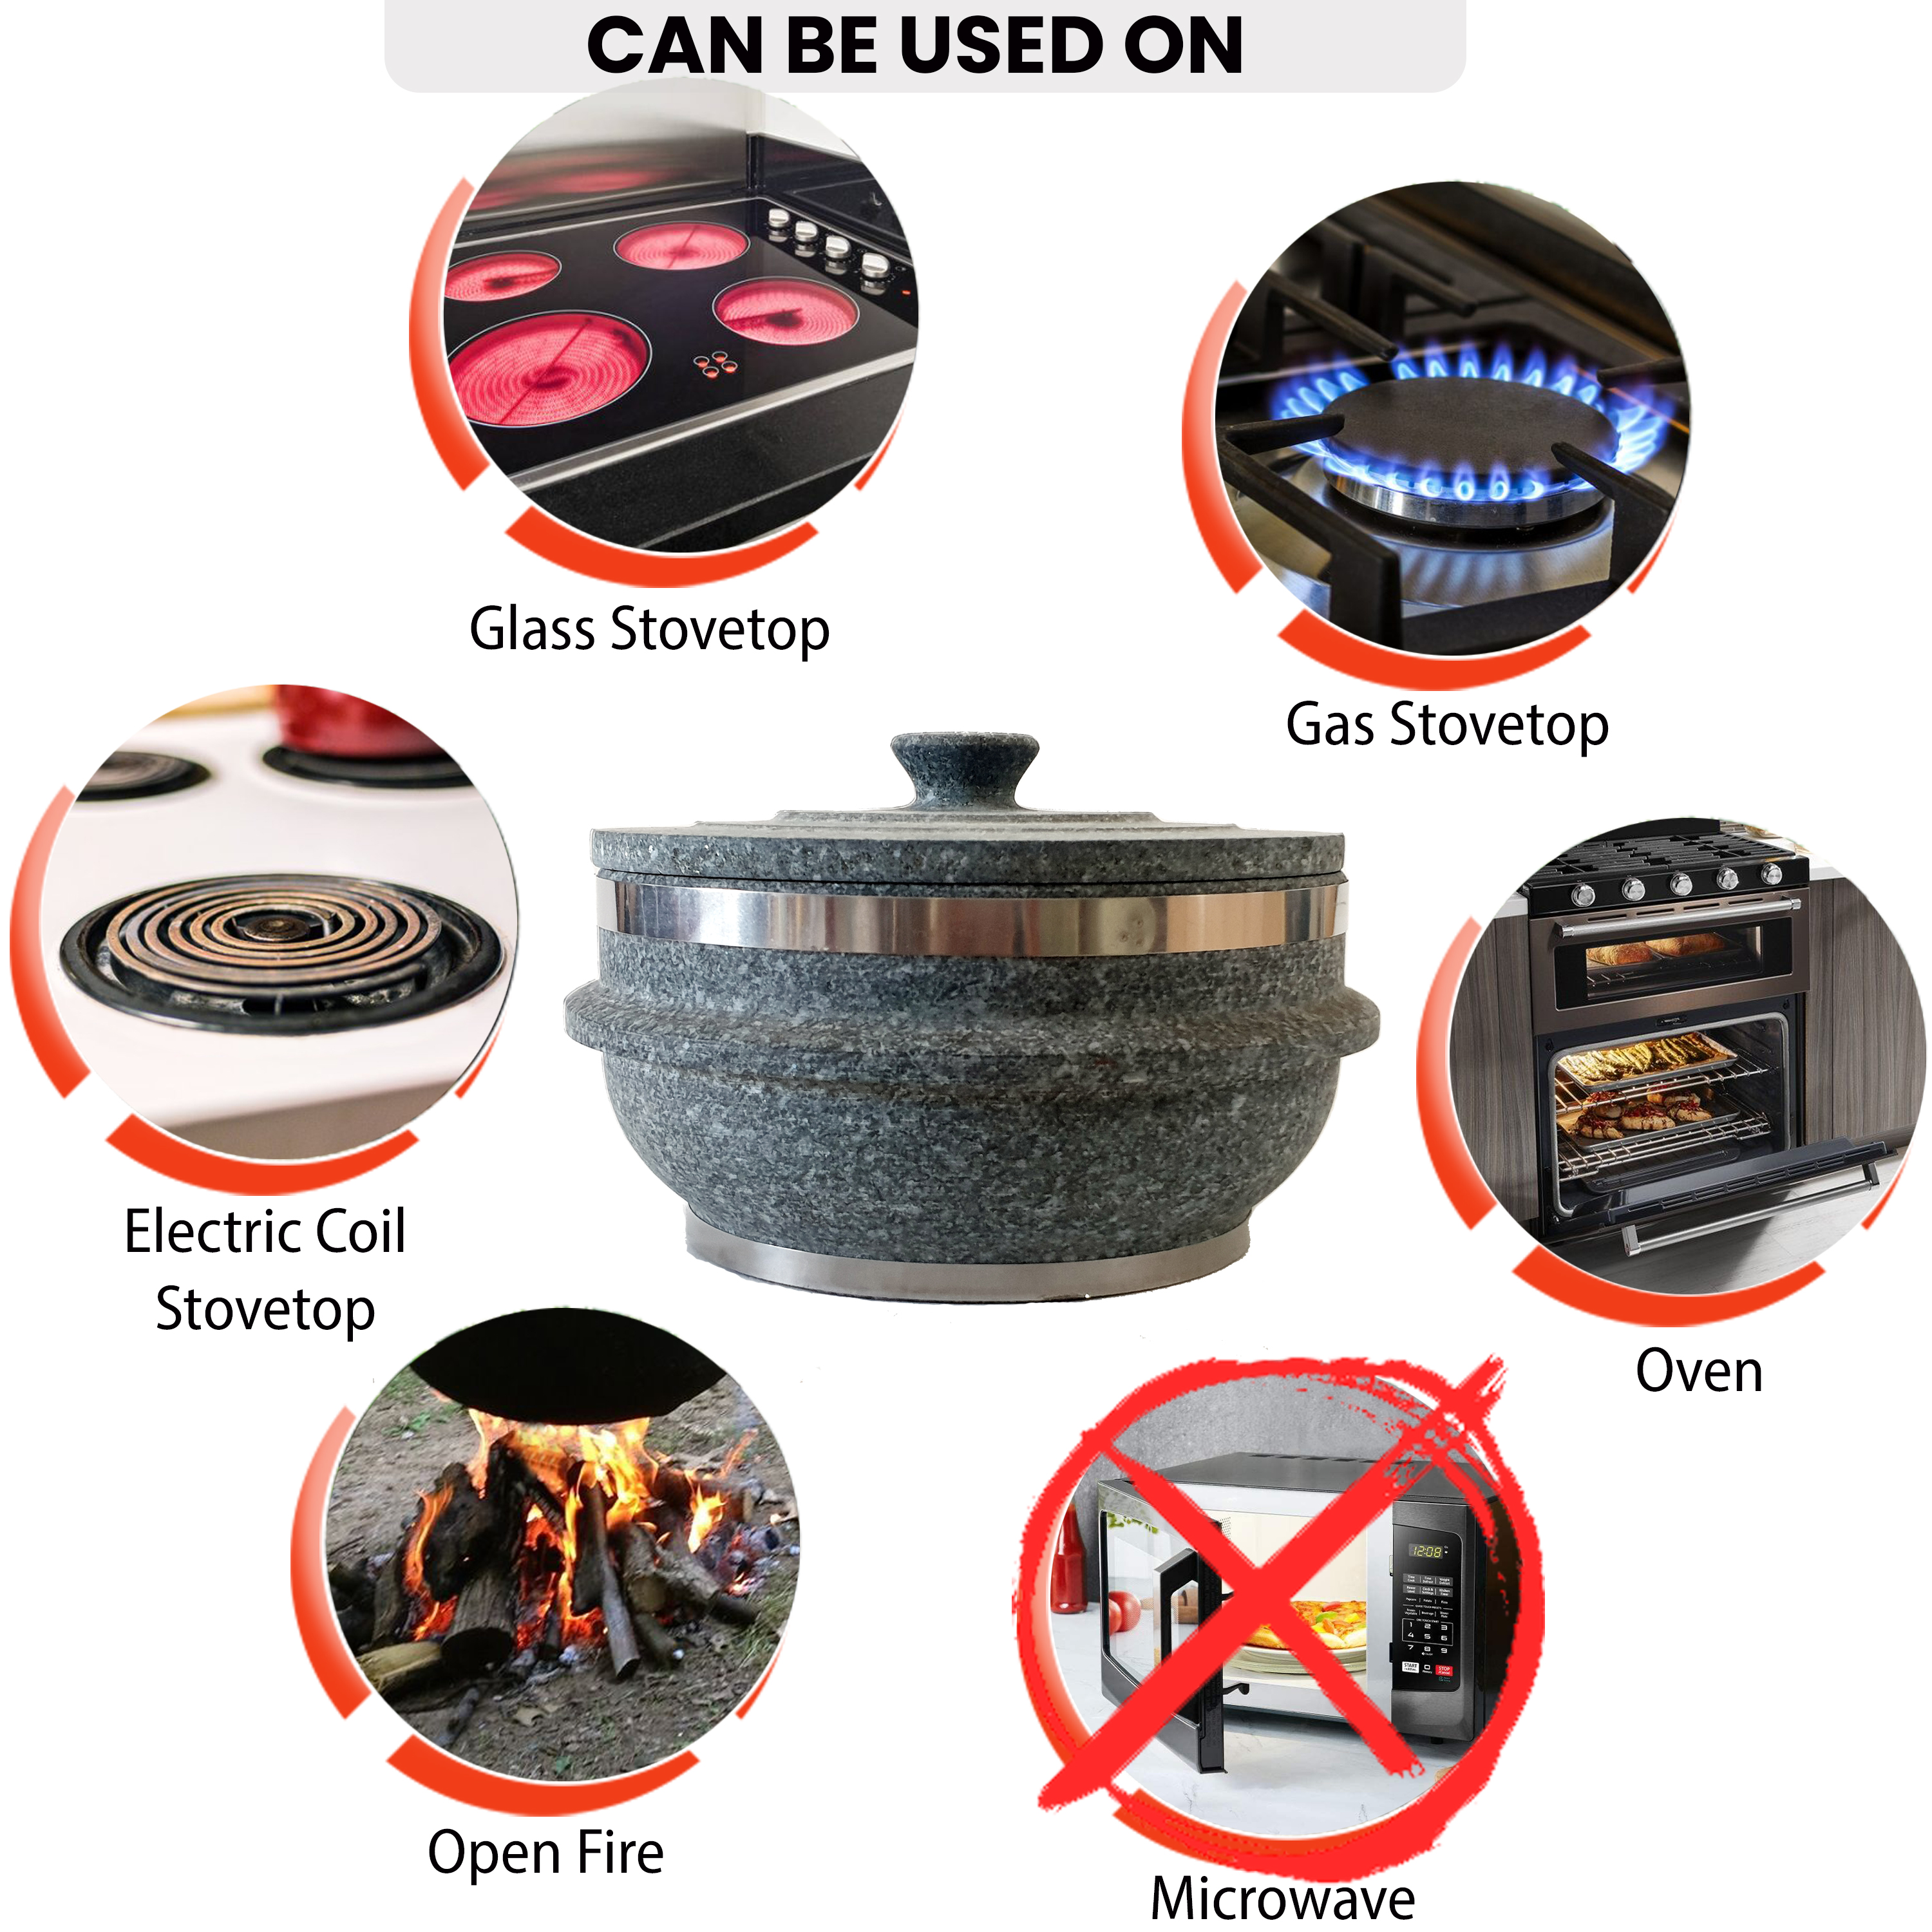 https://ancientcookware.com/images/stories/virtuemart/product/kor_1222_09_6_Can%20be%20used%20On.jpg